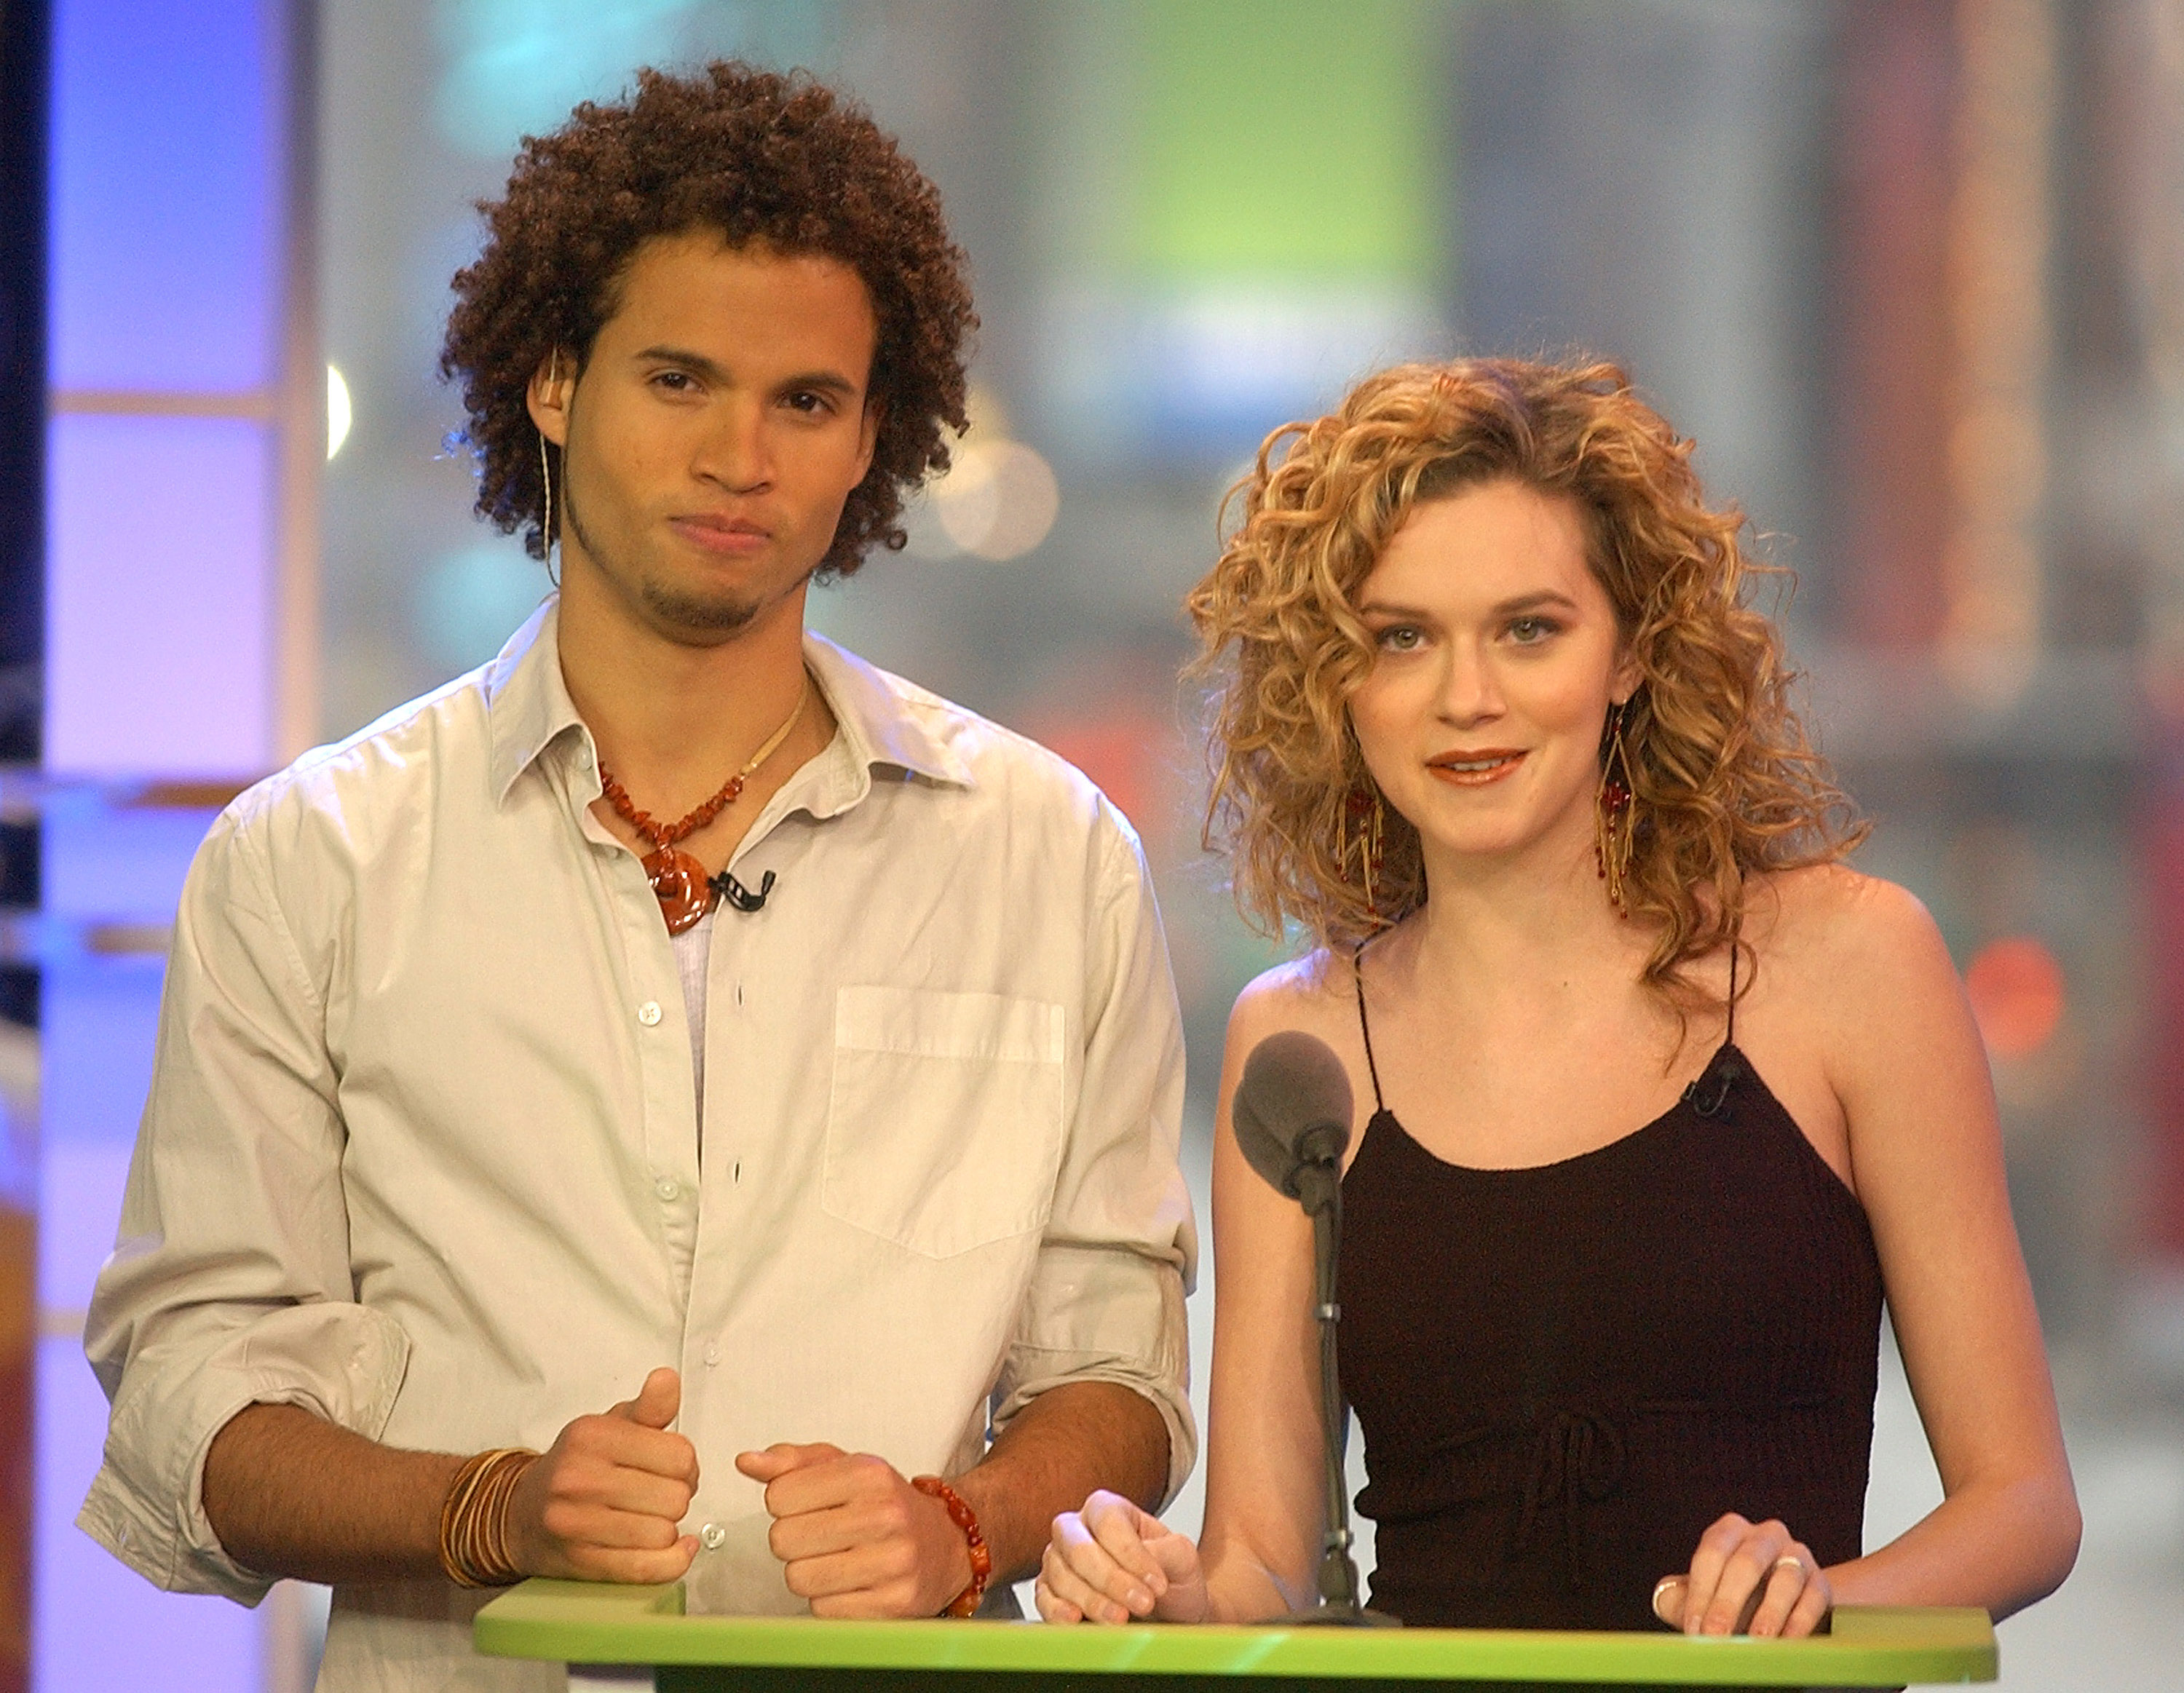 Quddus and Hilarie Burton during the "TRL Awards" at the MTV Times Square Studios, on February 17, 2003, in New York City. | Source: Getty Images